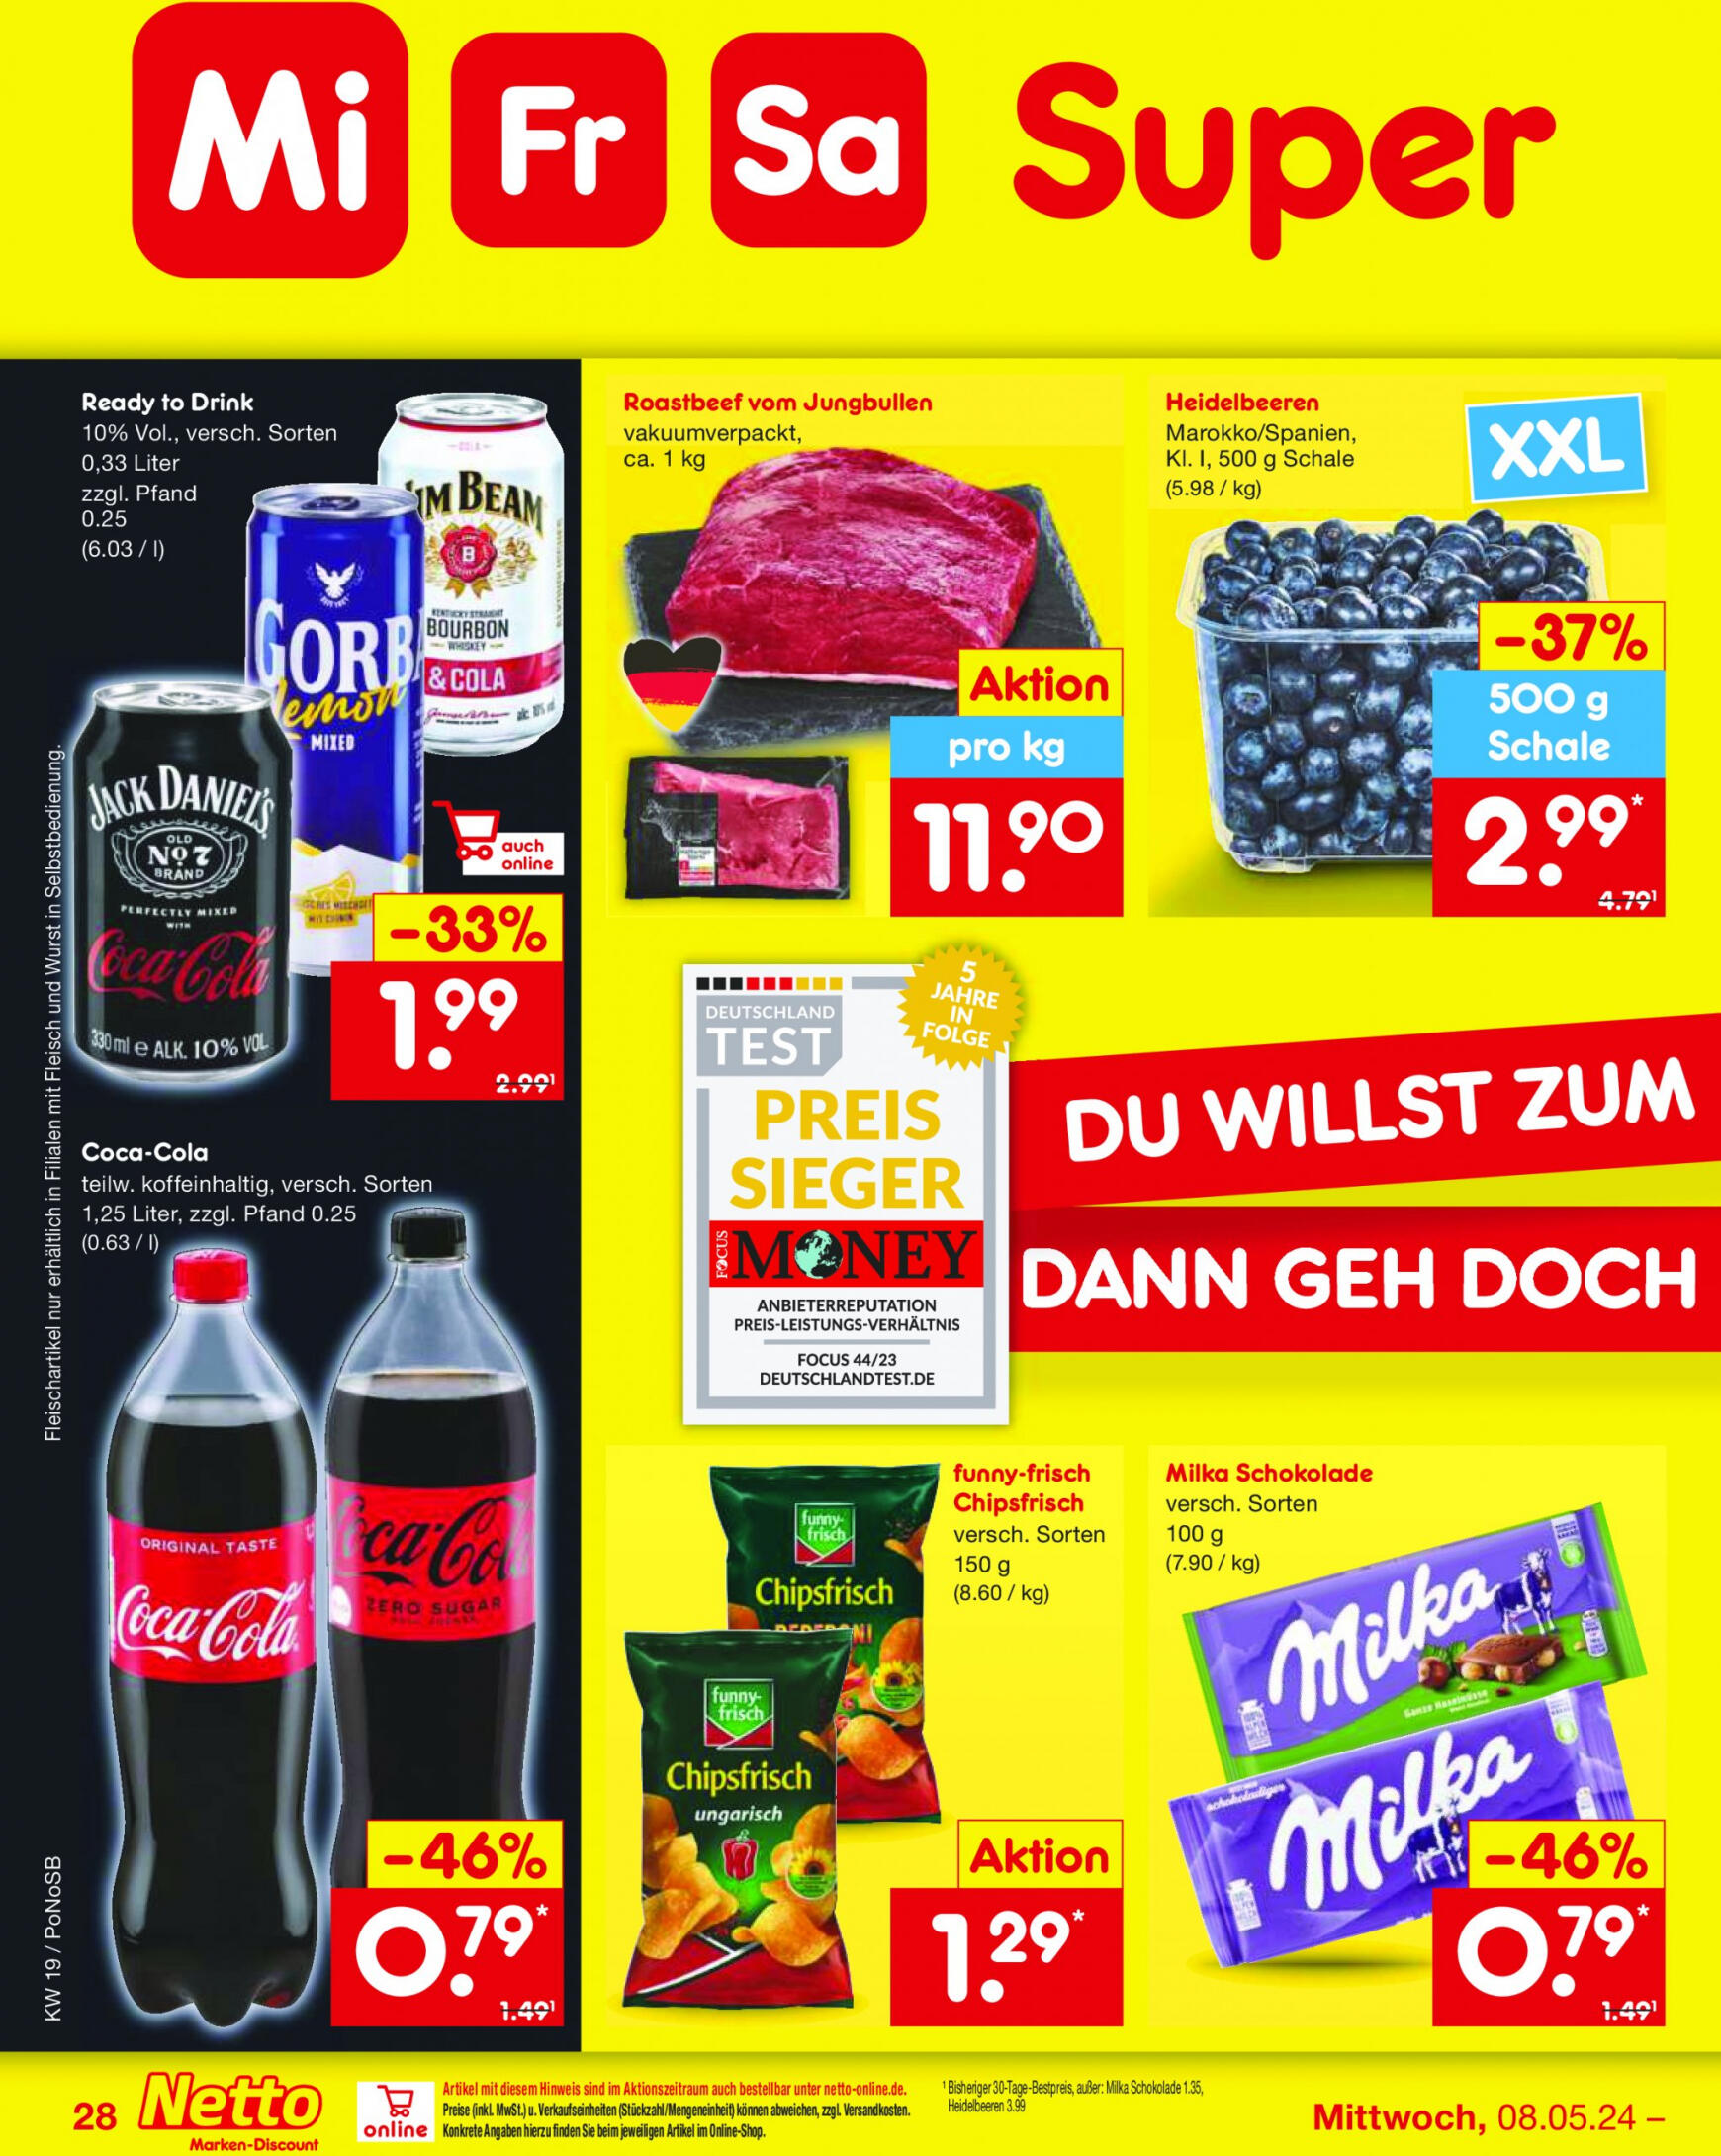 netto - Flyer Netto aktuell 06.05. - 11.05. - page: 38